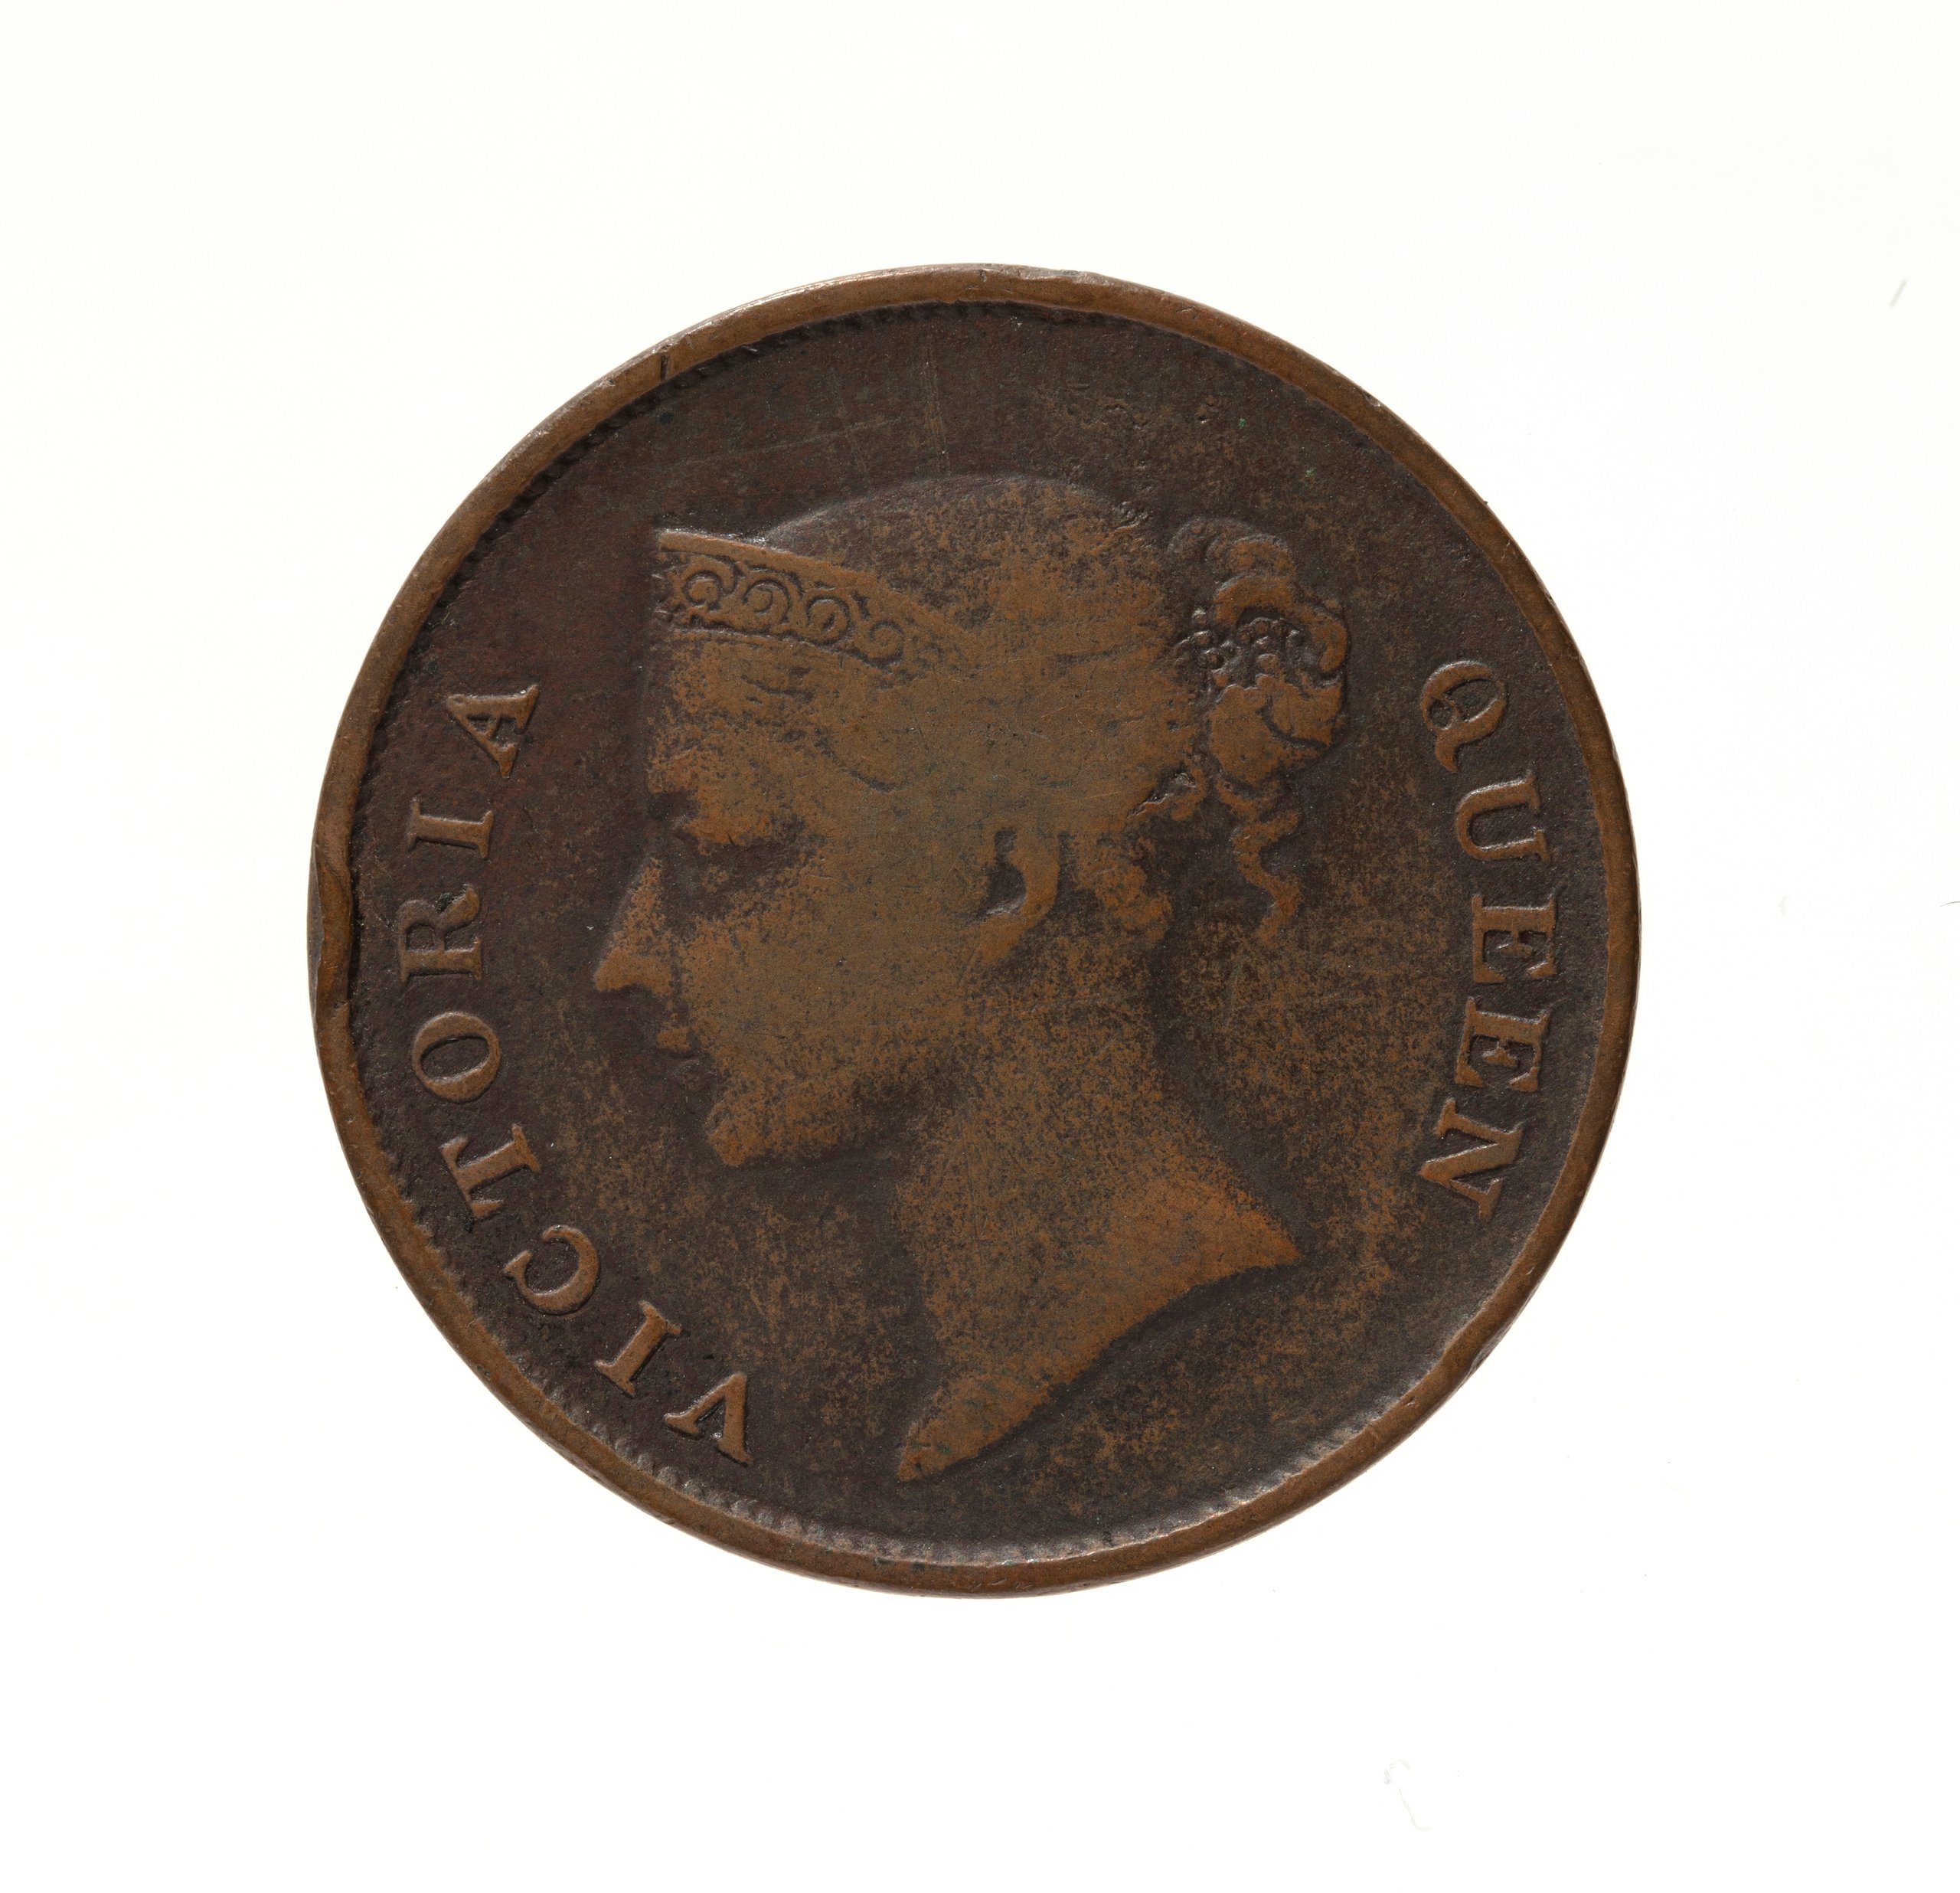 Straits Settlements One Cent coin